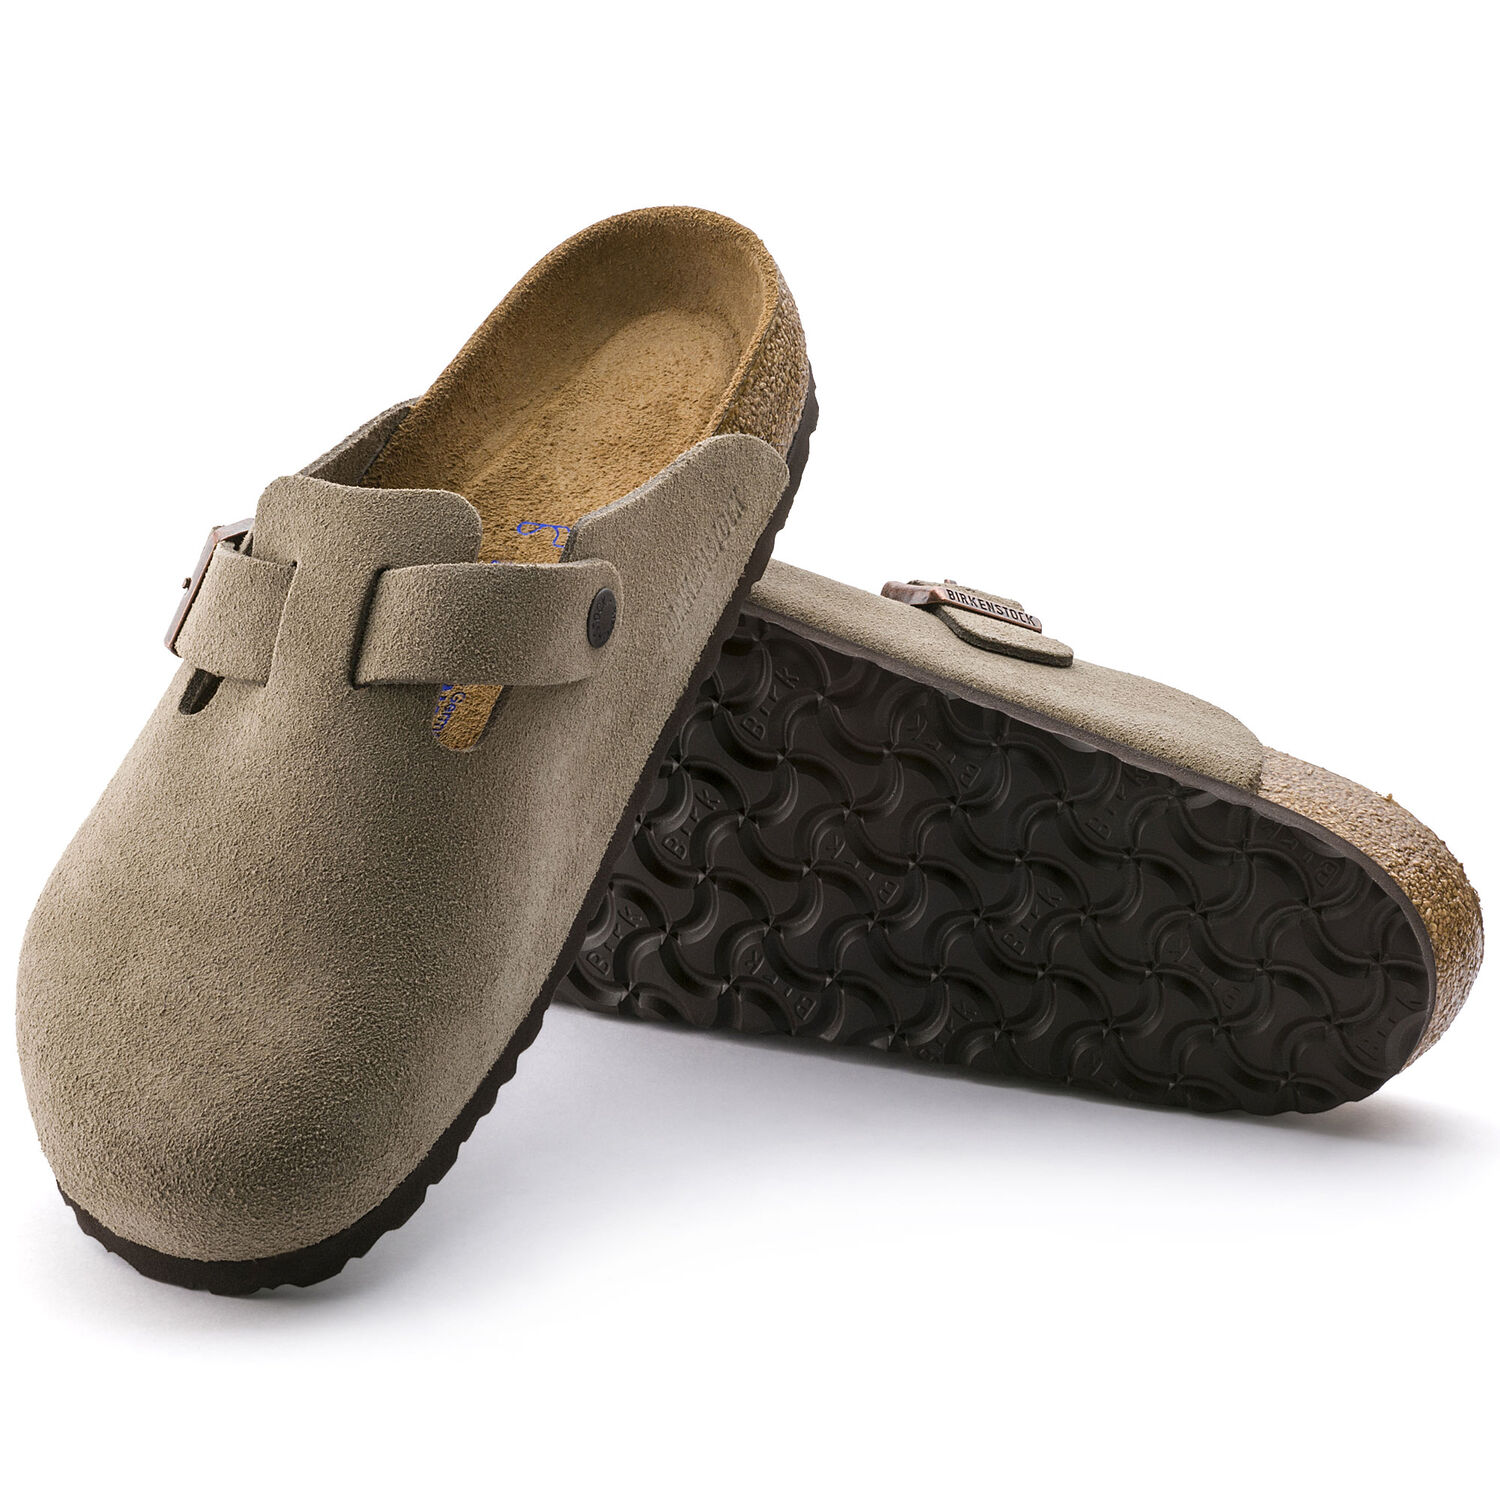 Birkenstock Boston Grip - Black and Brown, sizes 41-46 for $90 with ...